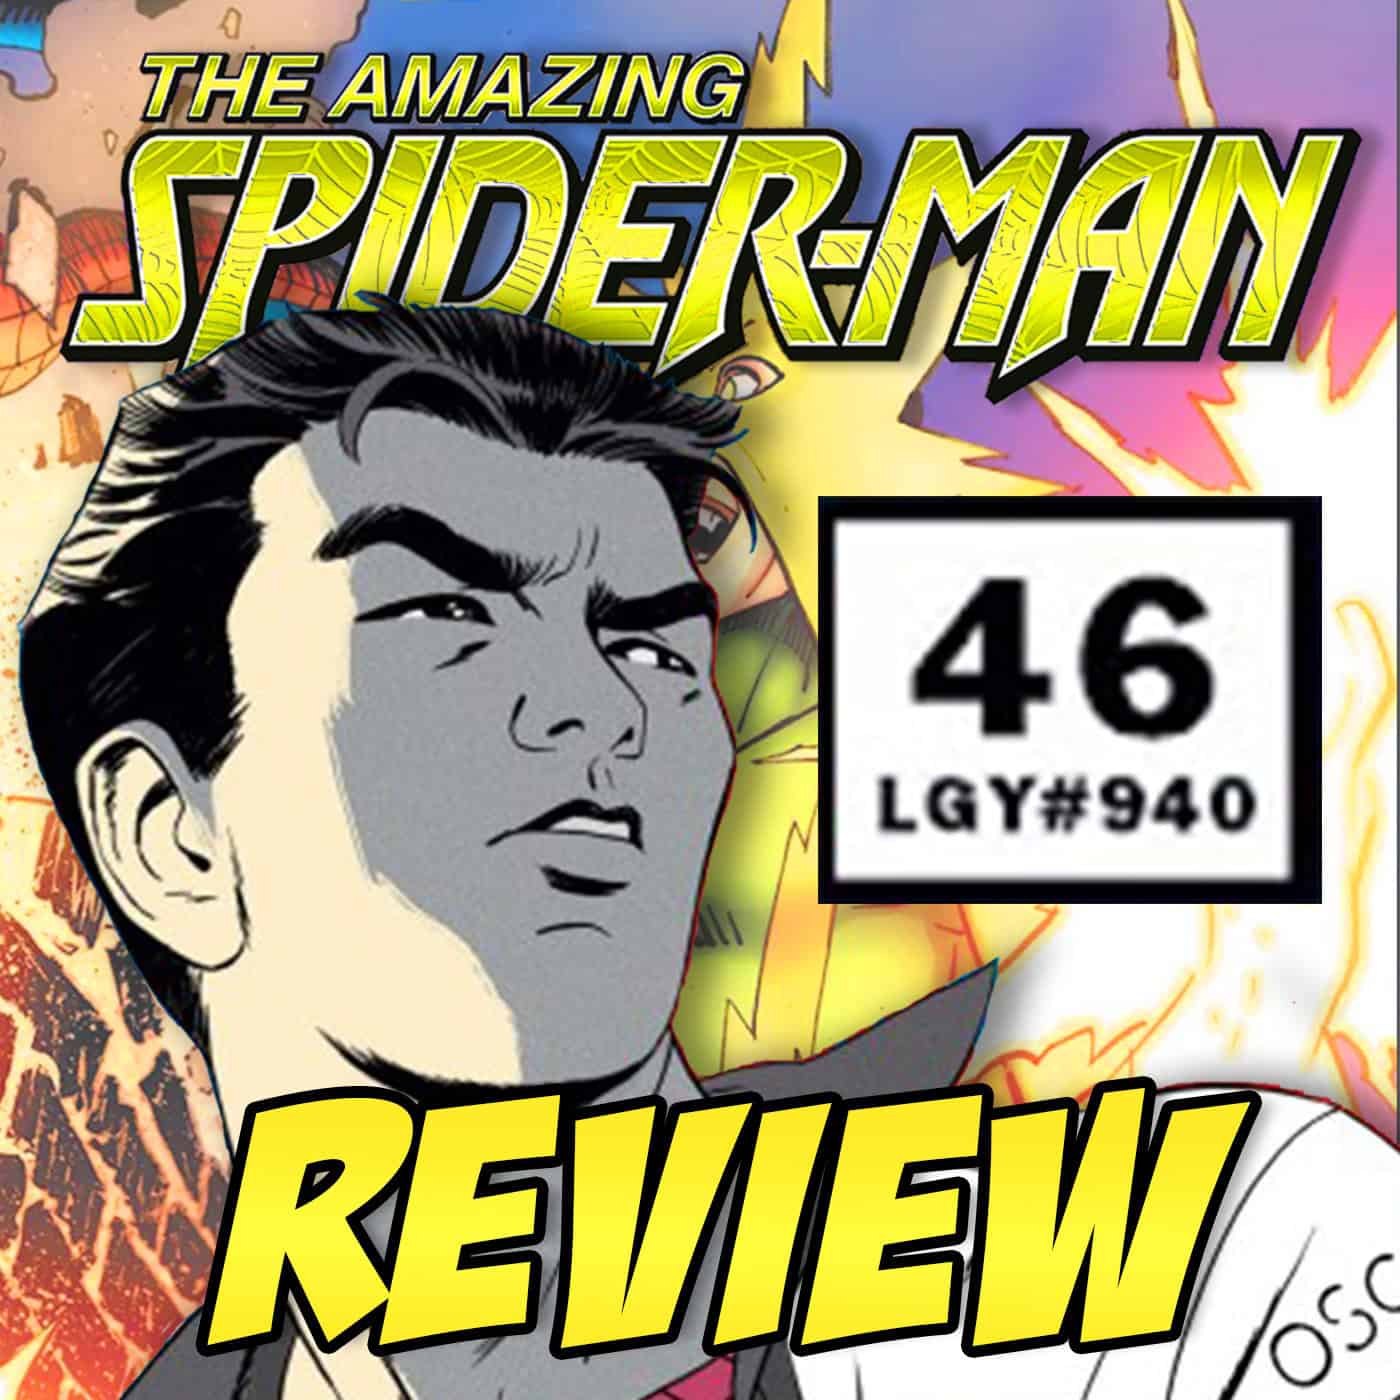 The Amazing Spider-Man (vol. 6) #46 – REVIEW